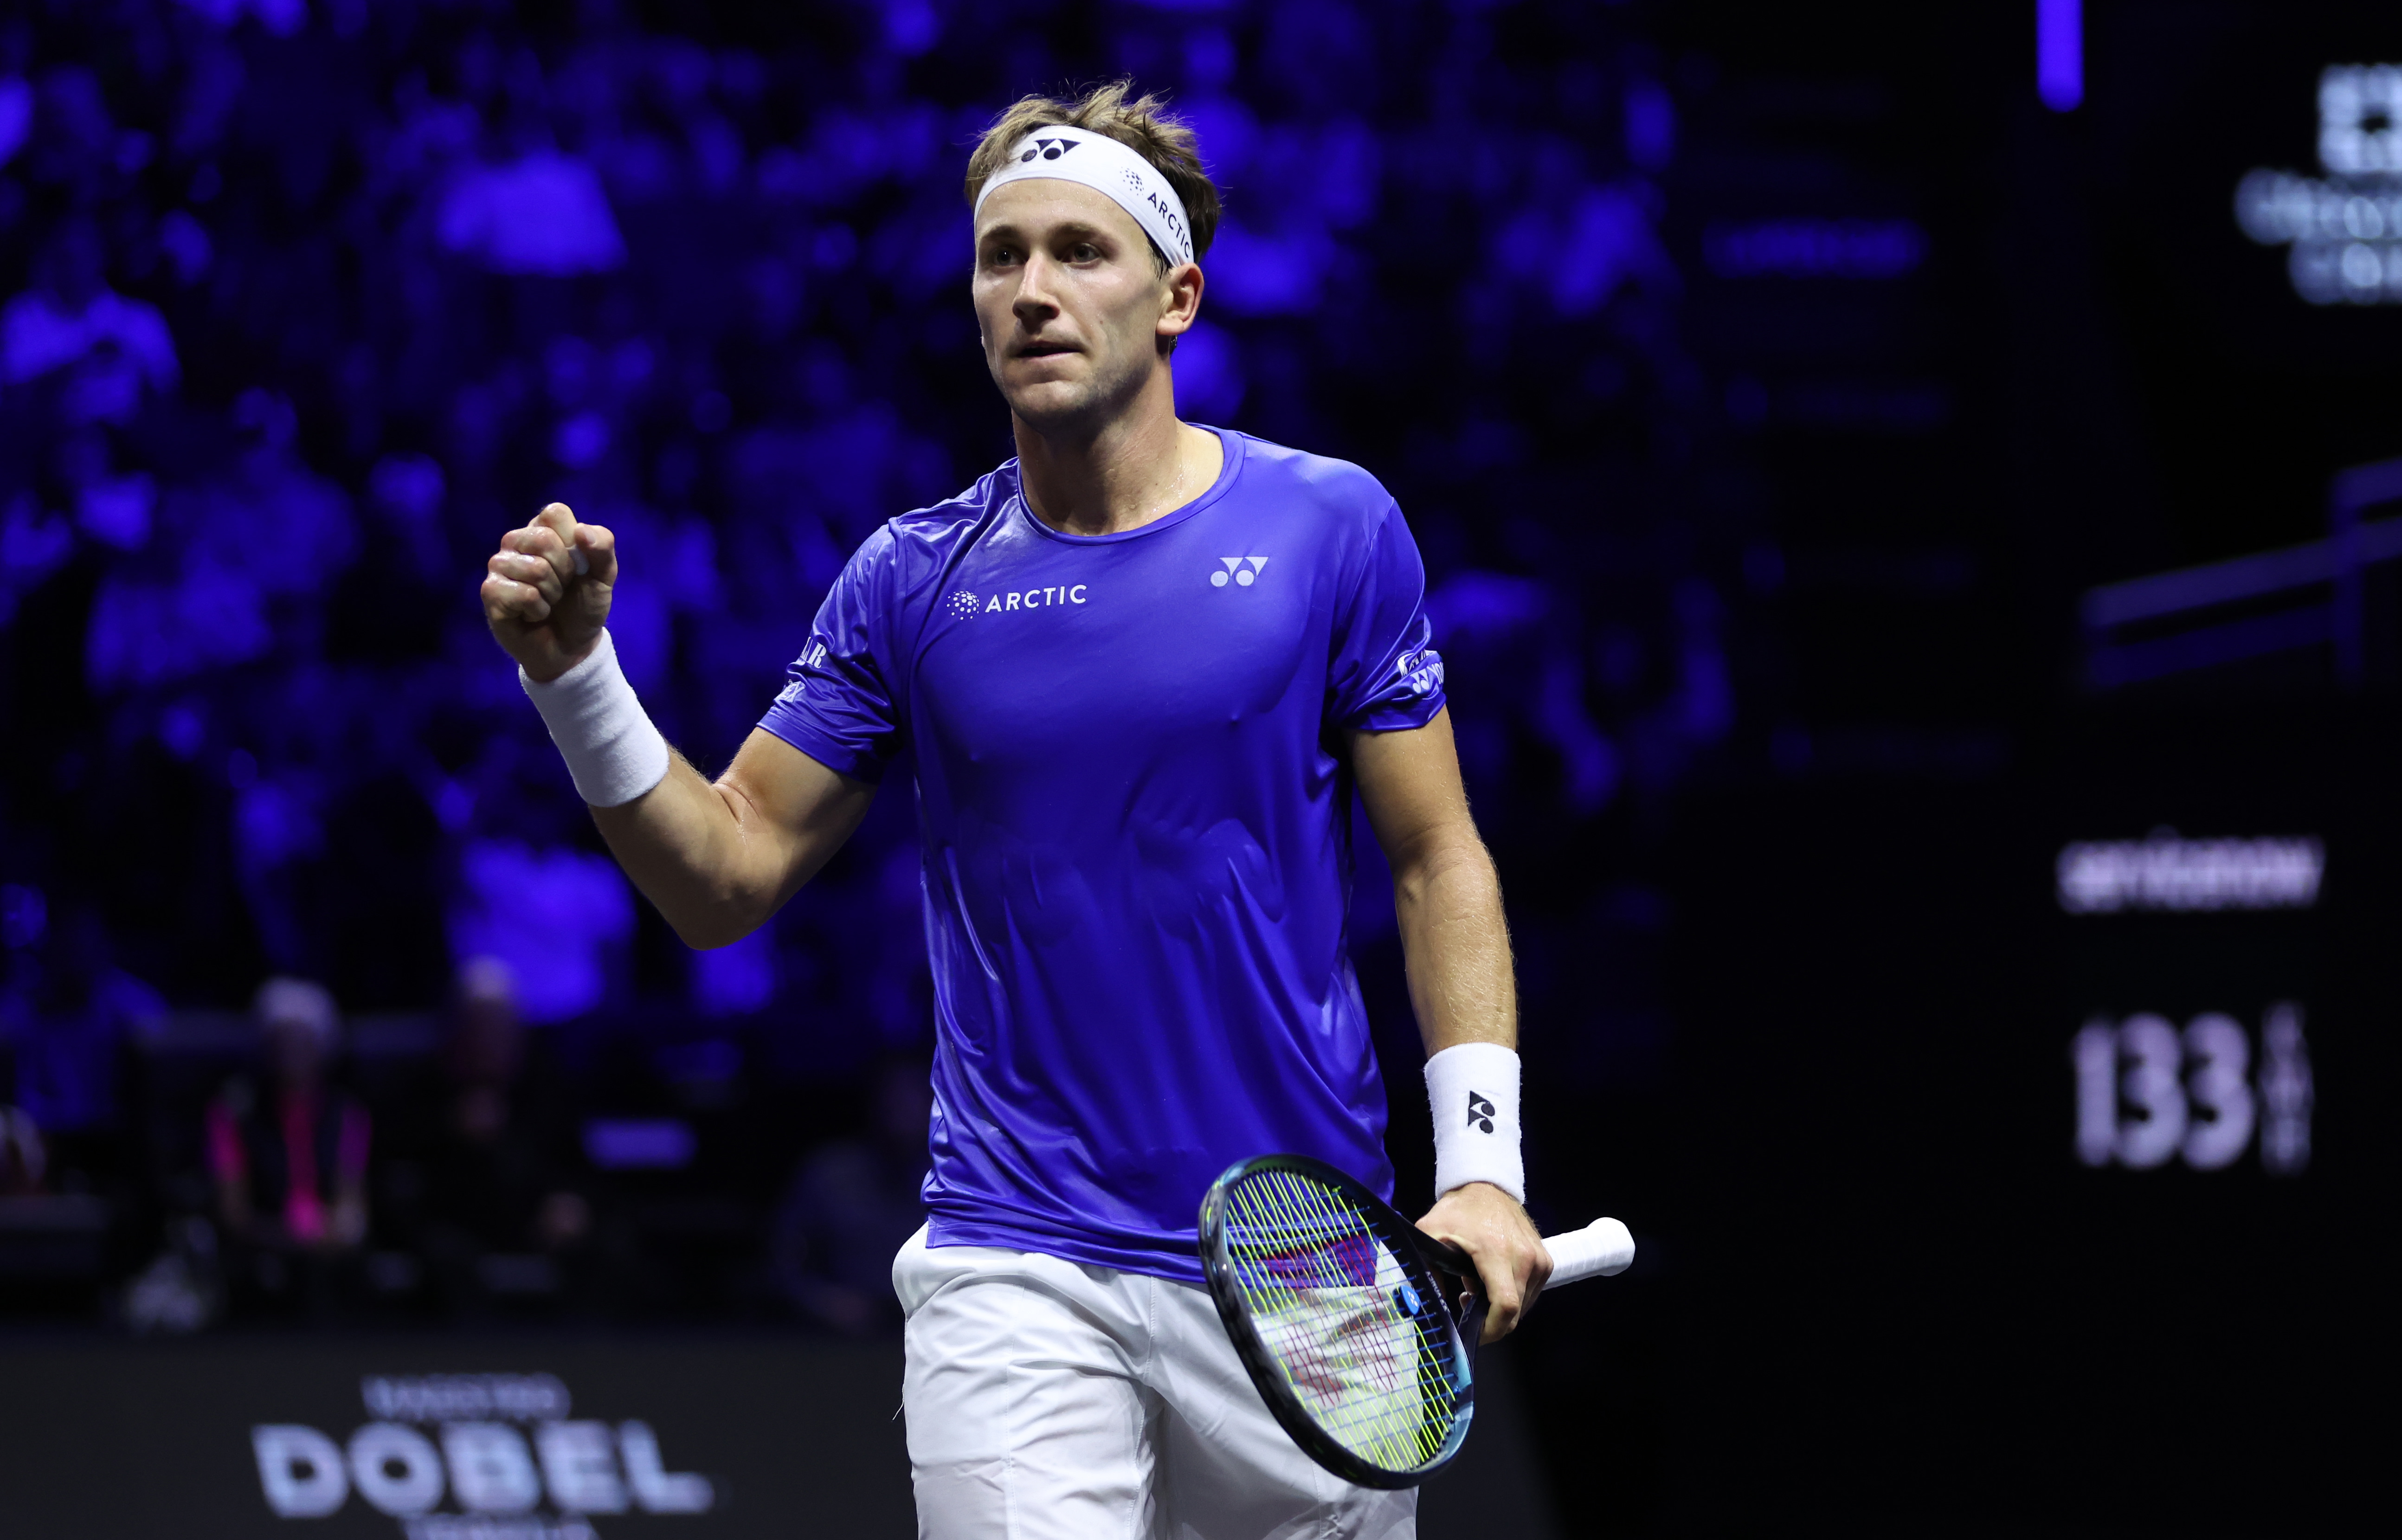 Casper Ruud beats Tommy Paul for Team Europes first win at Laver Cup in Vancouver